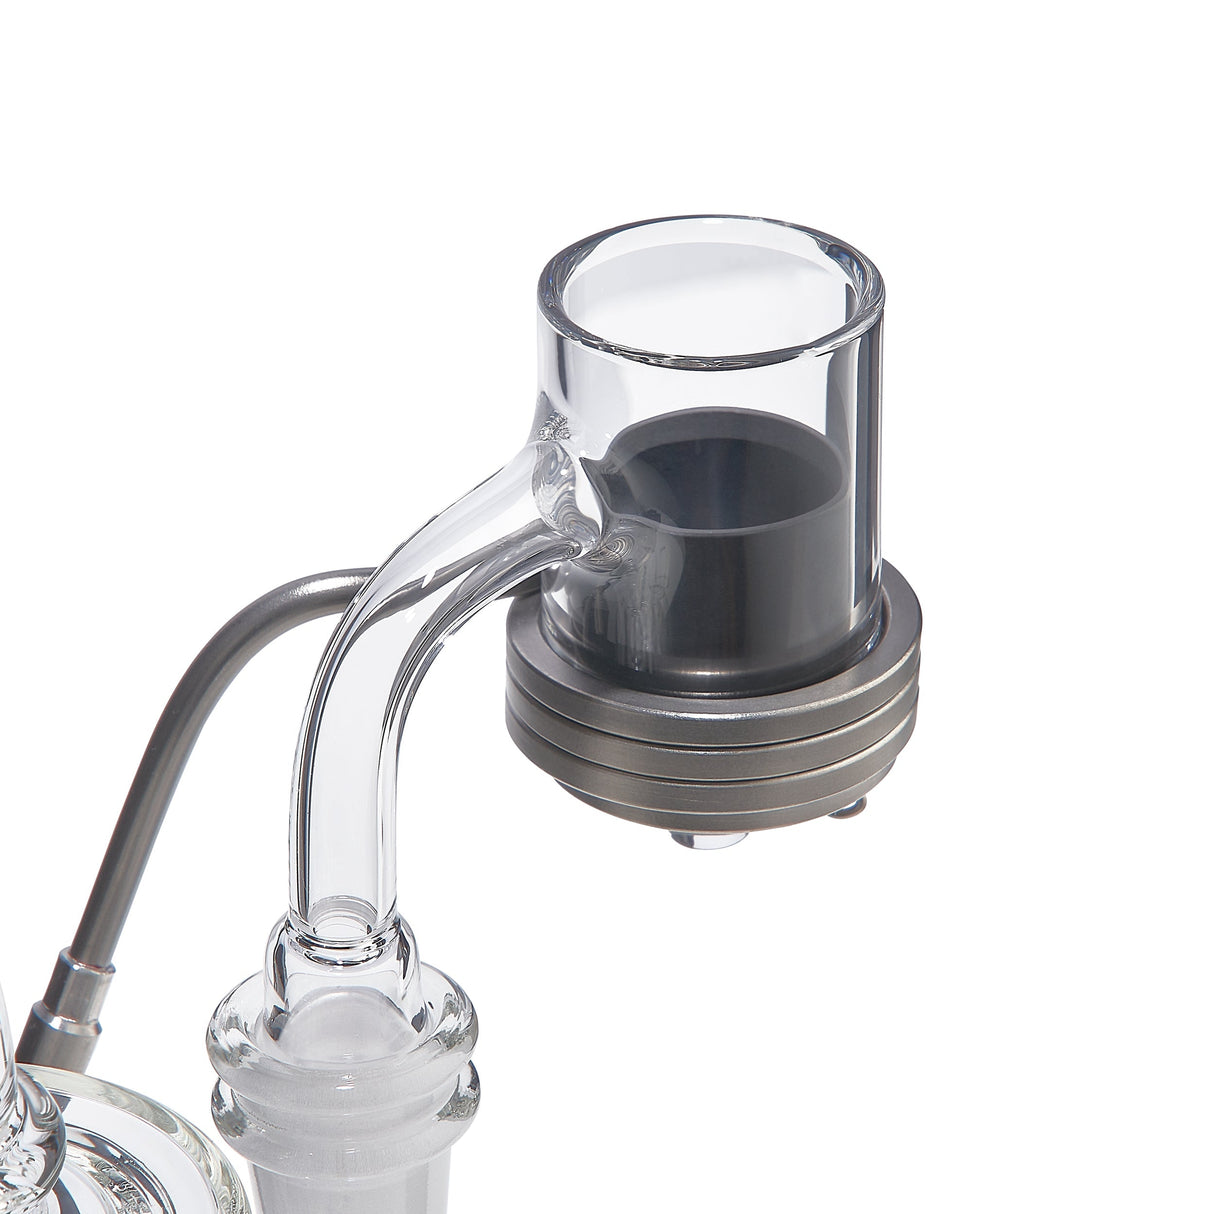 High Five SIC E-Banger Insert for Dab Rigs, close-up side view on seamless white background